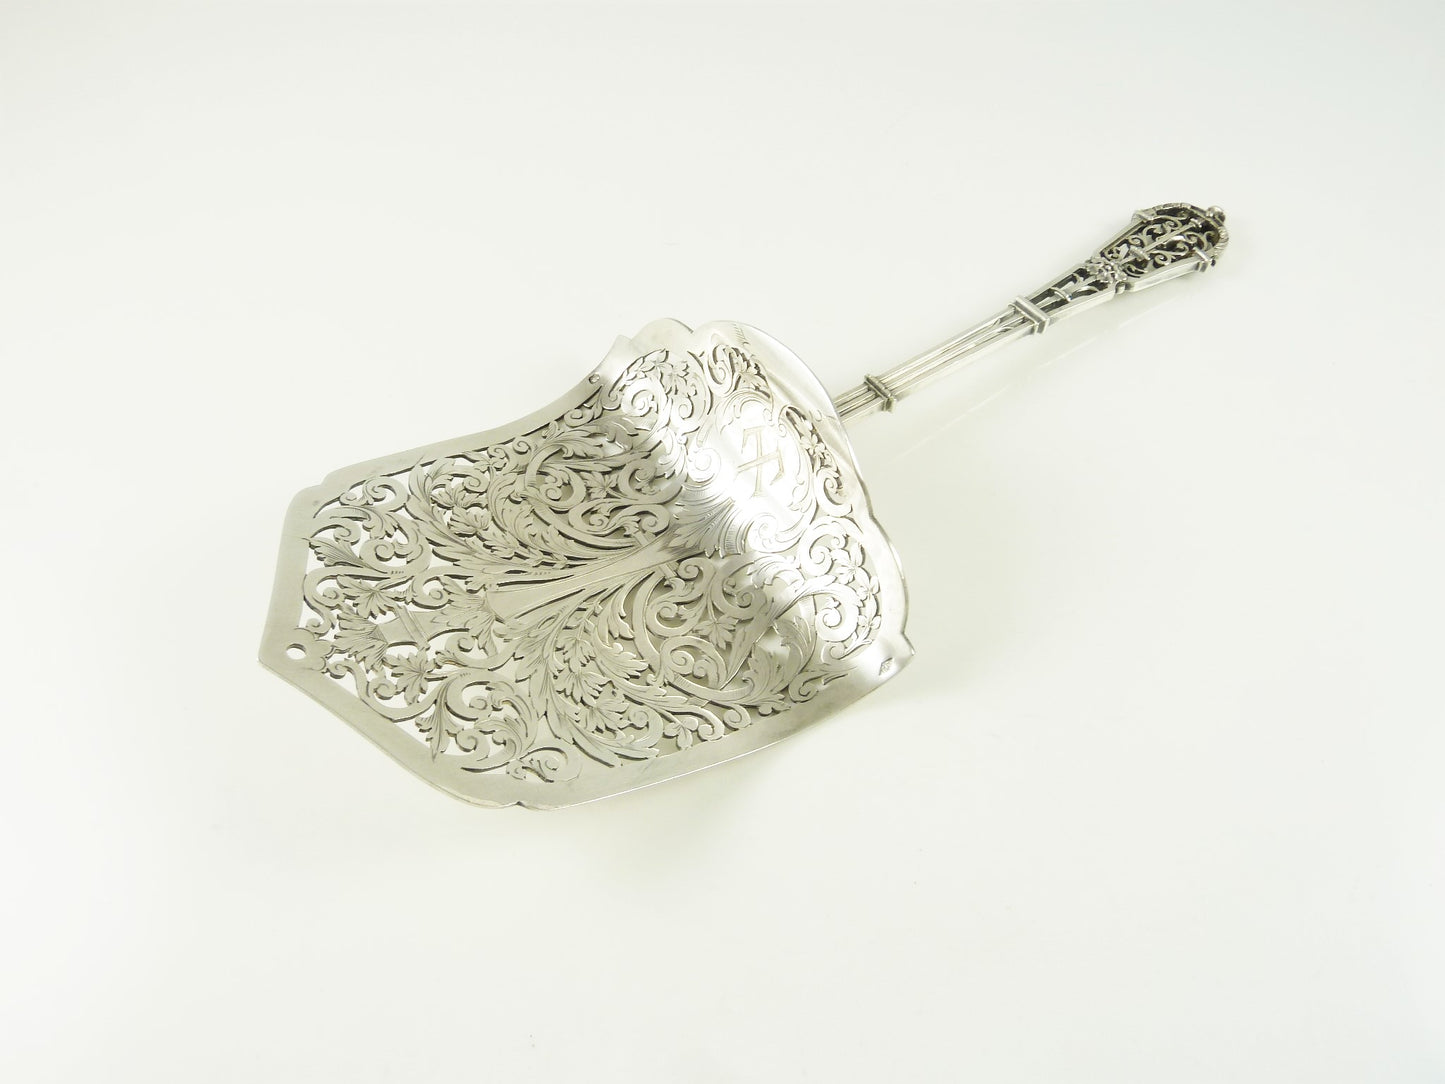 Puiforcat Sterling Silver Asparagus or Pastry Server with Presentation Box - 43 Chesapeake Court Antiques